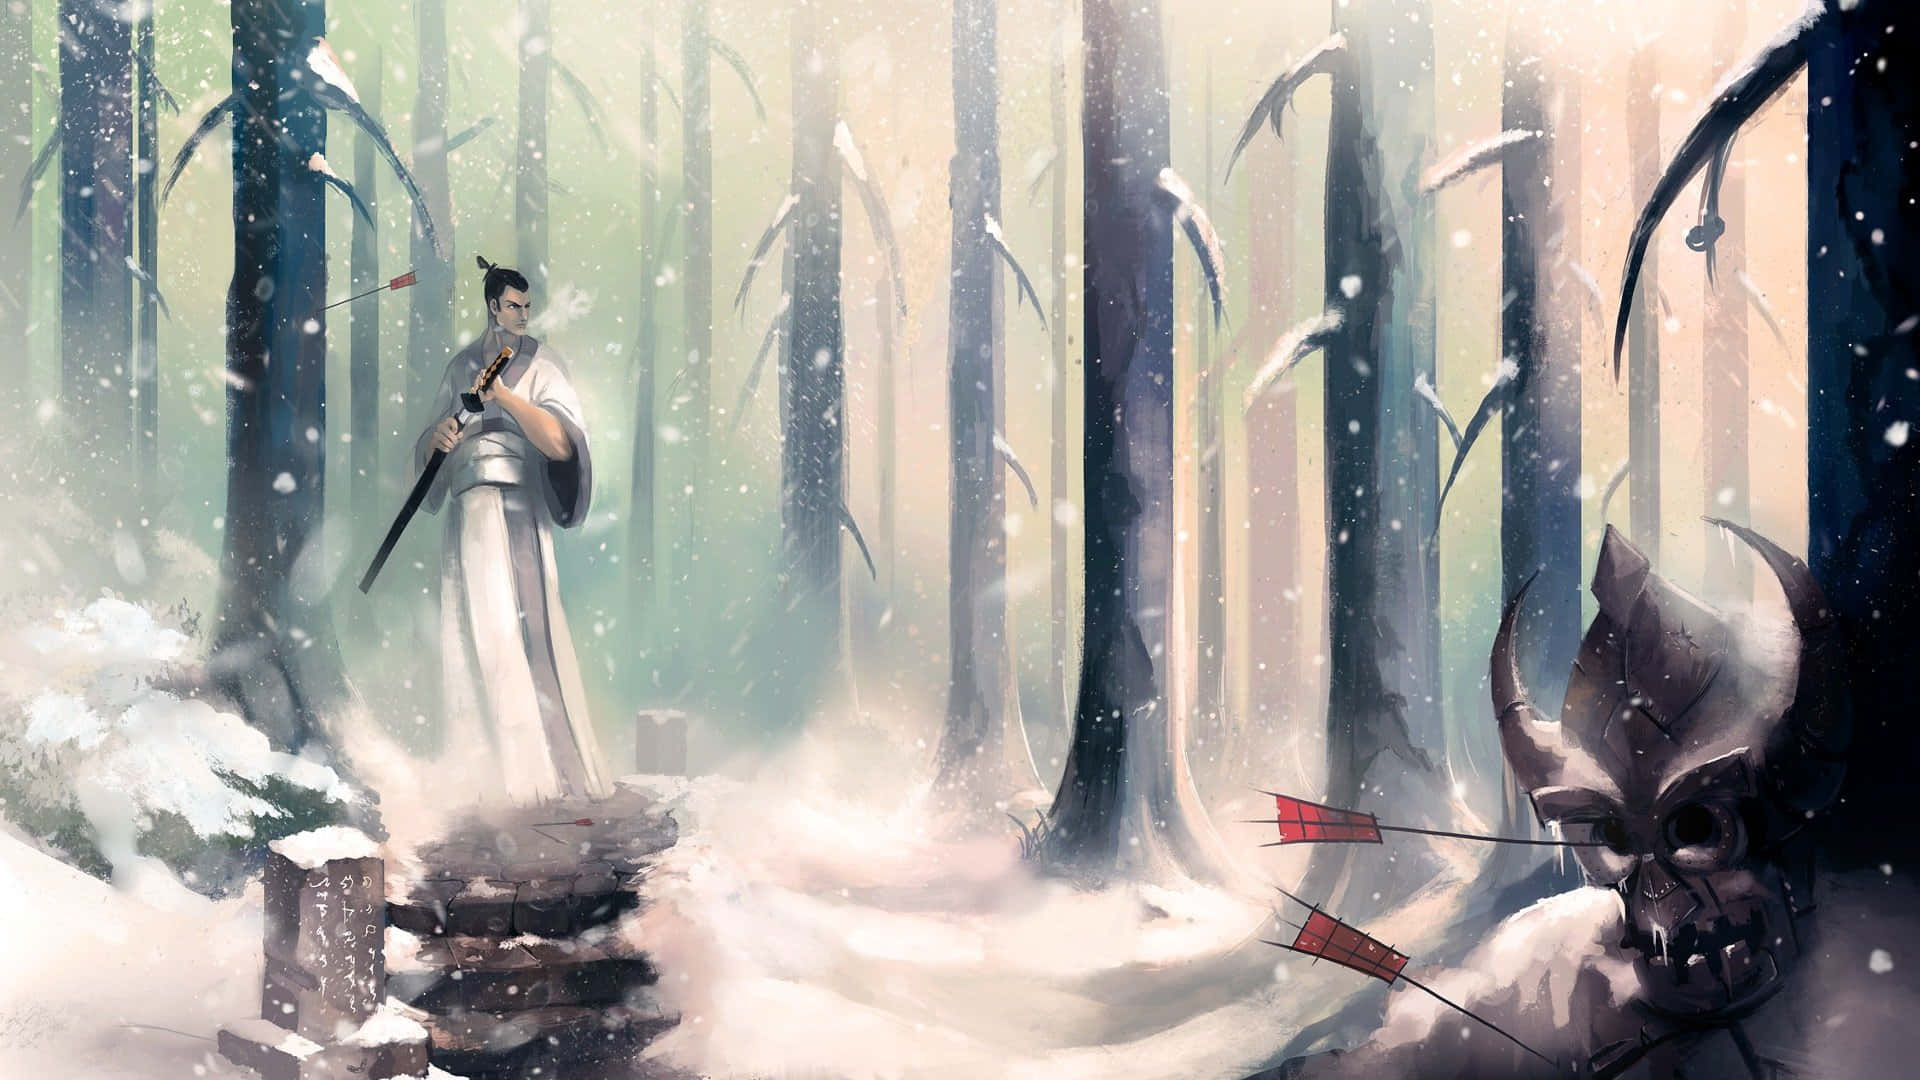 Samurai Jack in a battle-ready pose against a vibrant background.